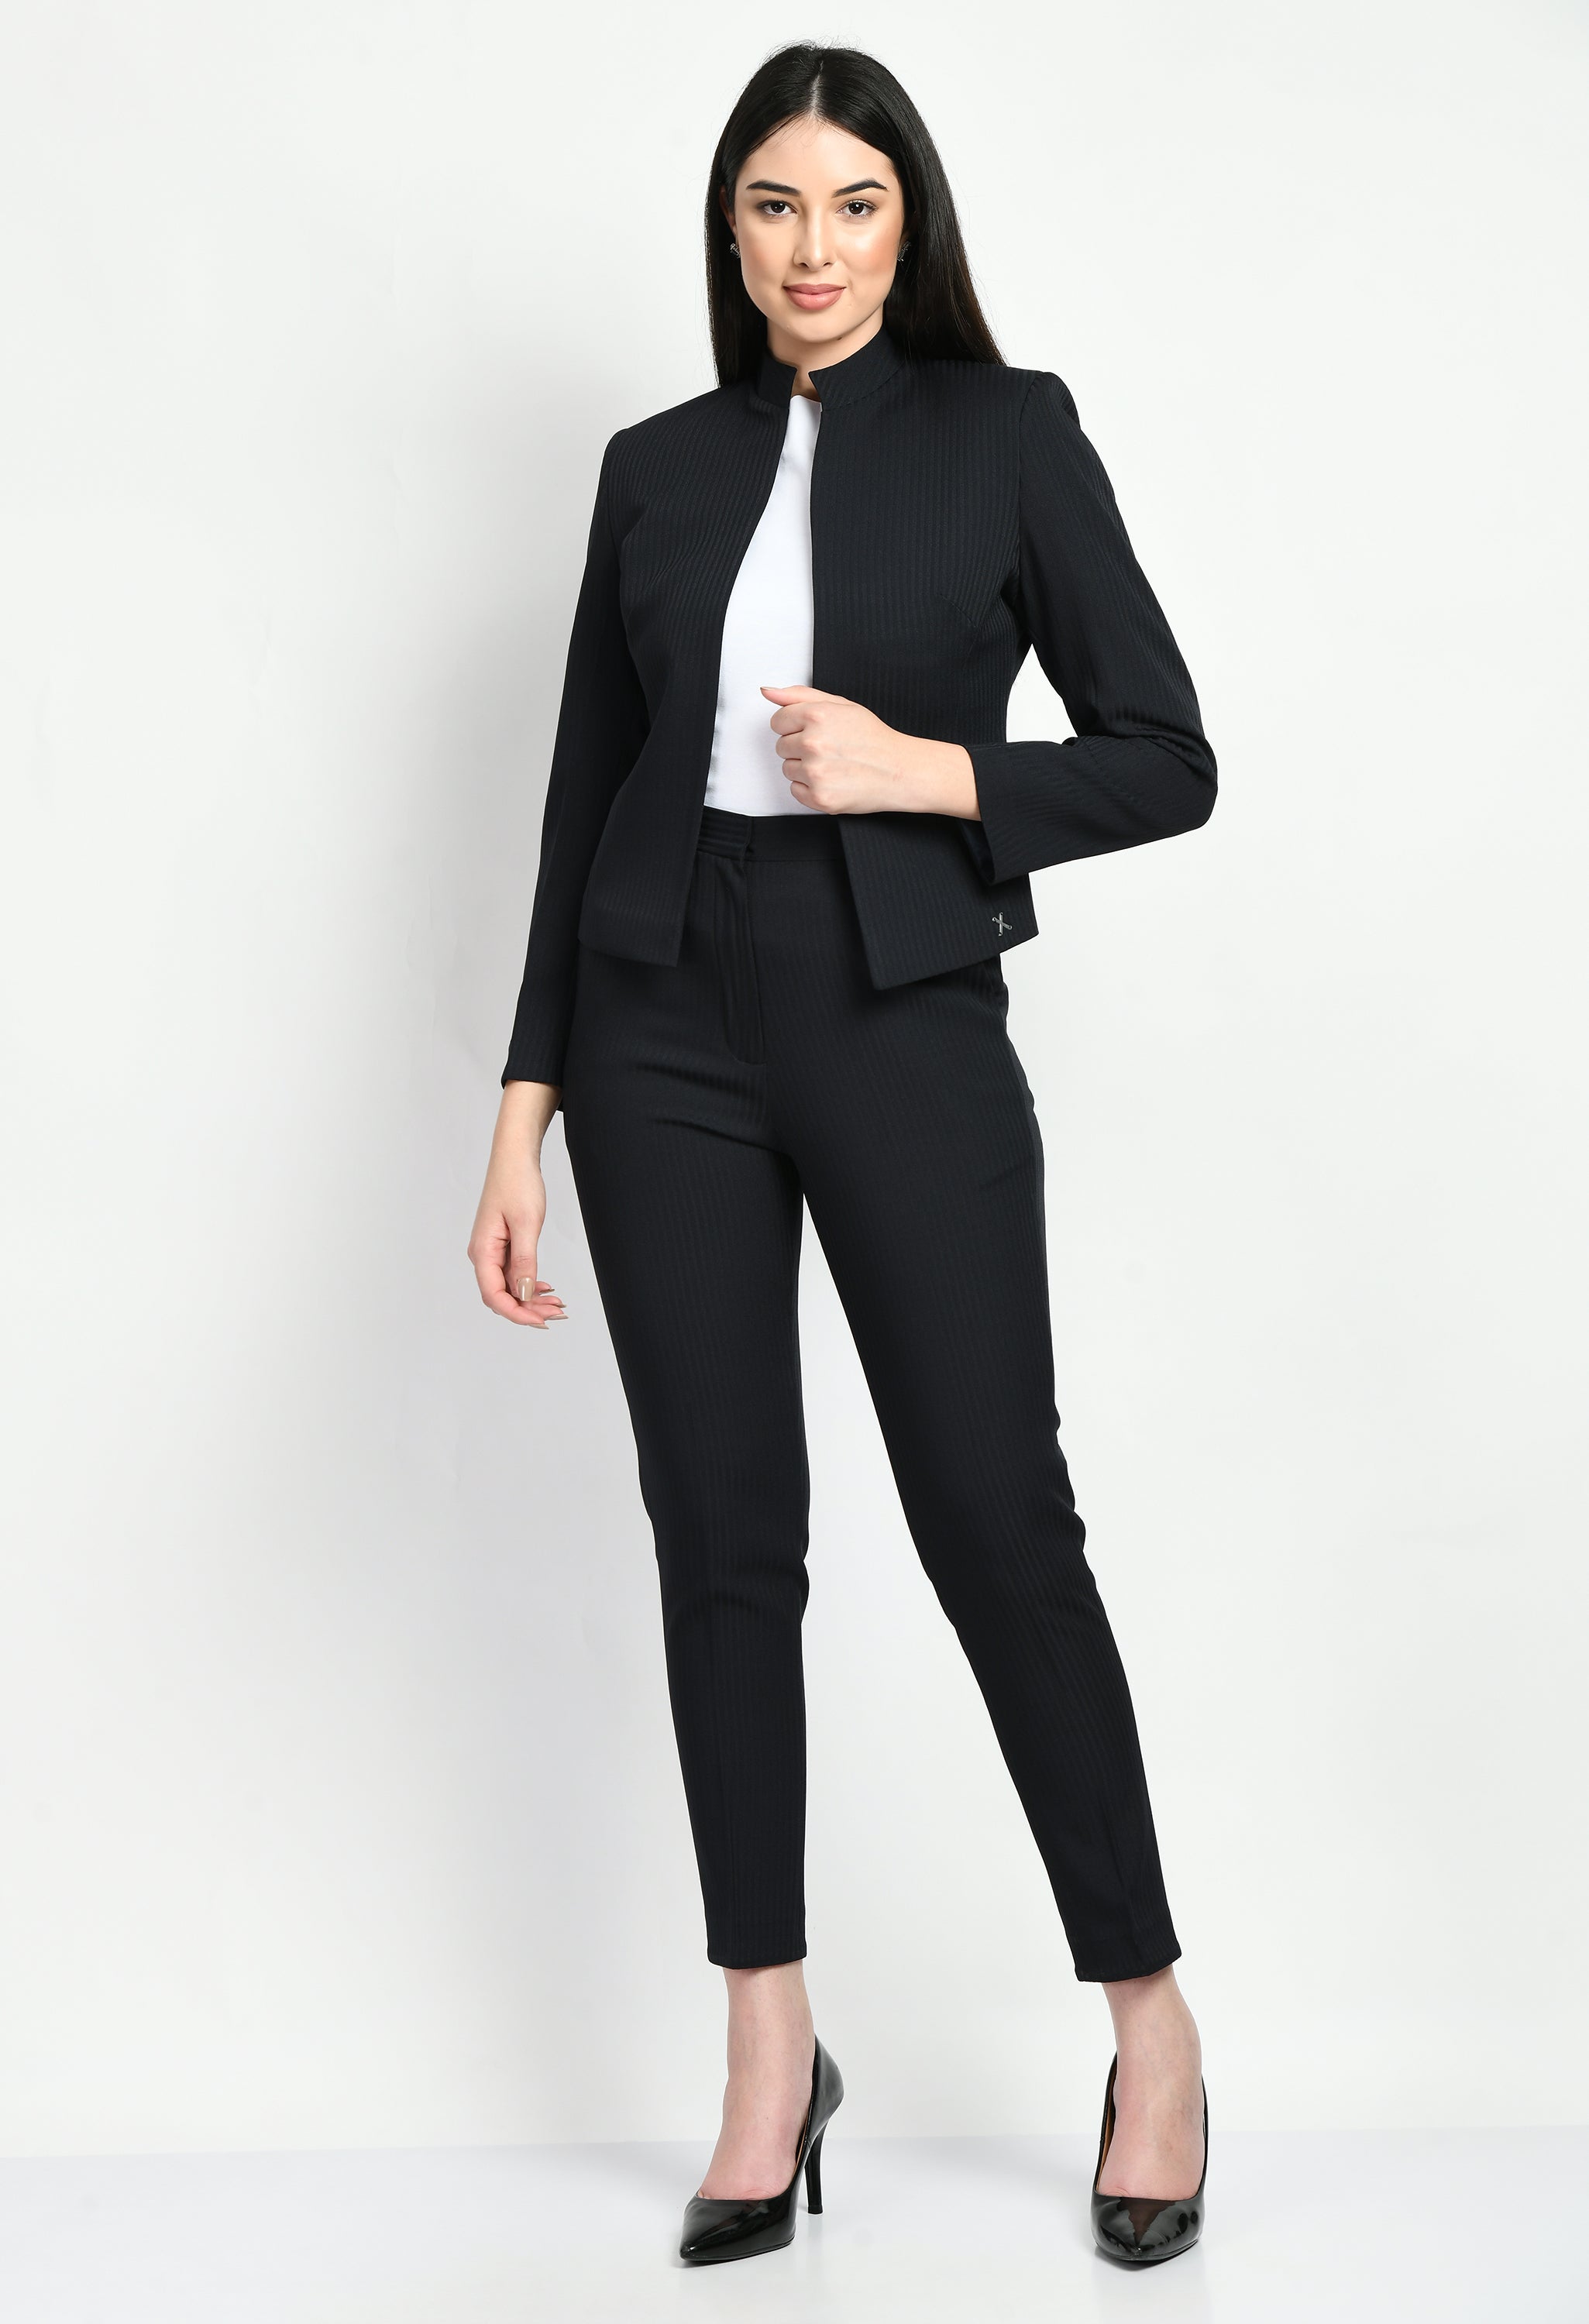 TeresaCollections - Waist Belted Blazer and High Waist Pants Suit Set